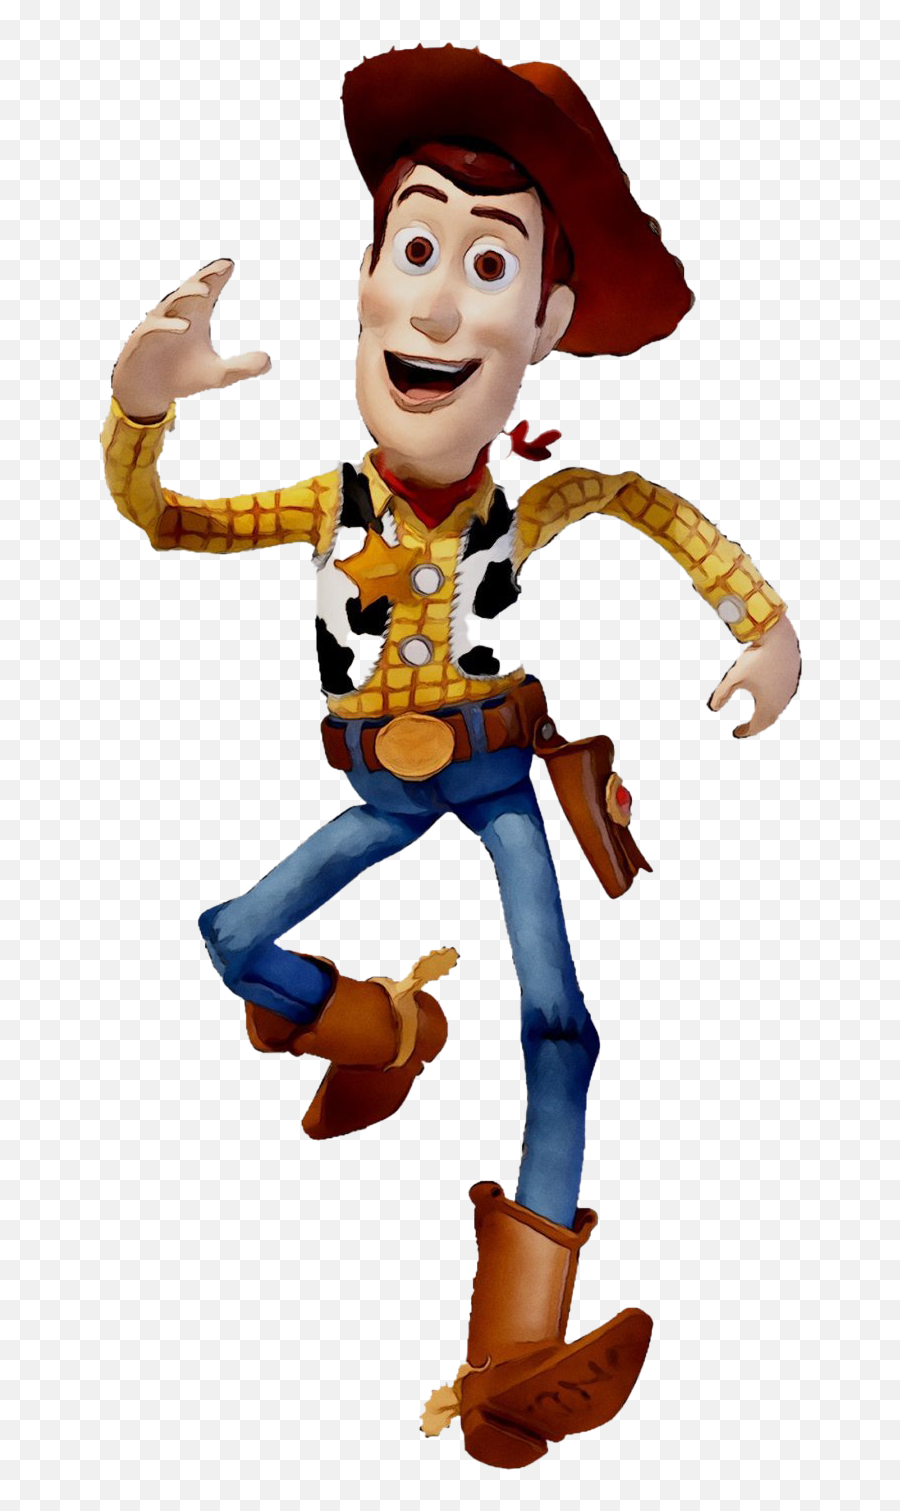 Toy Story Movie Png Images - Fictional Character,Toy Story Desktop Icon